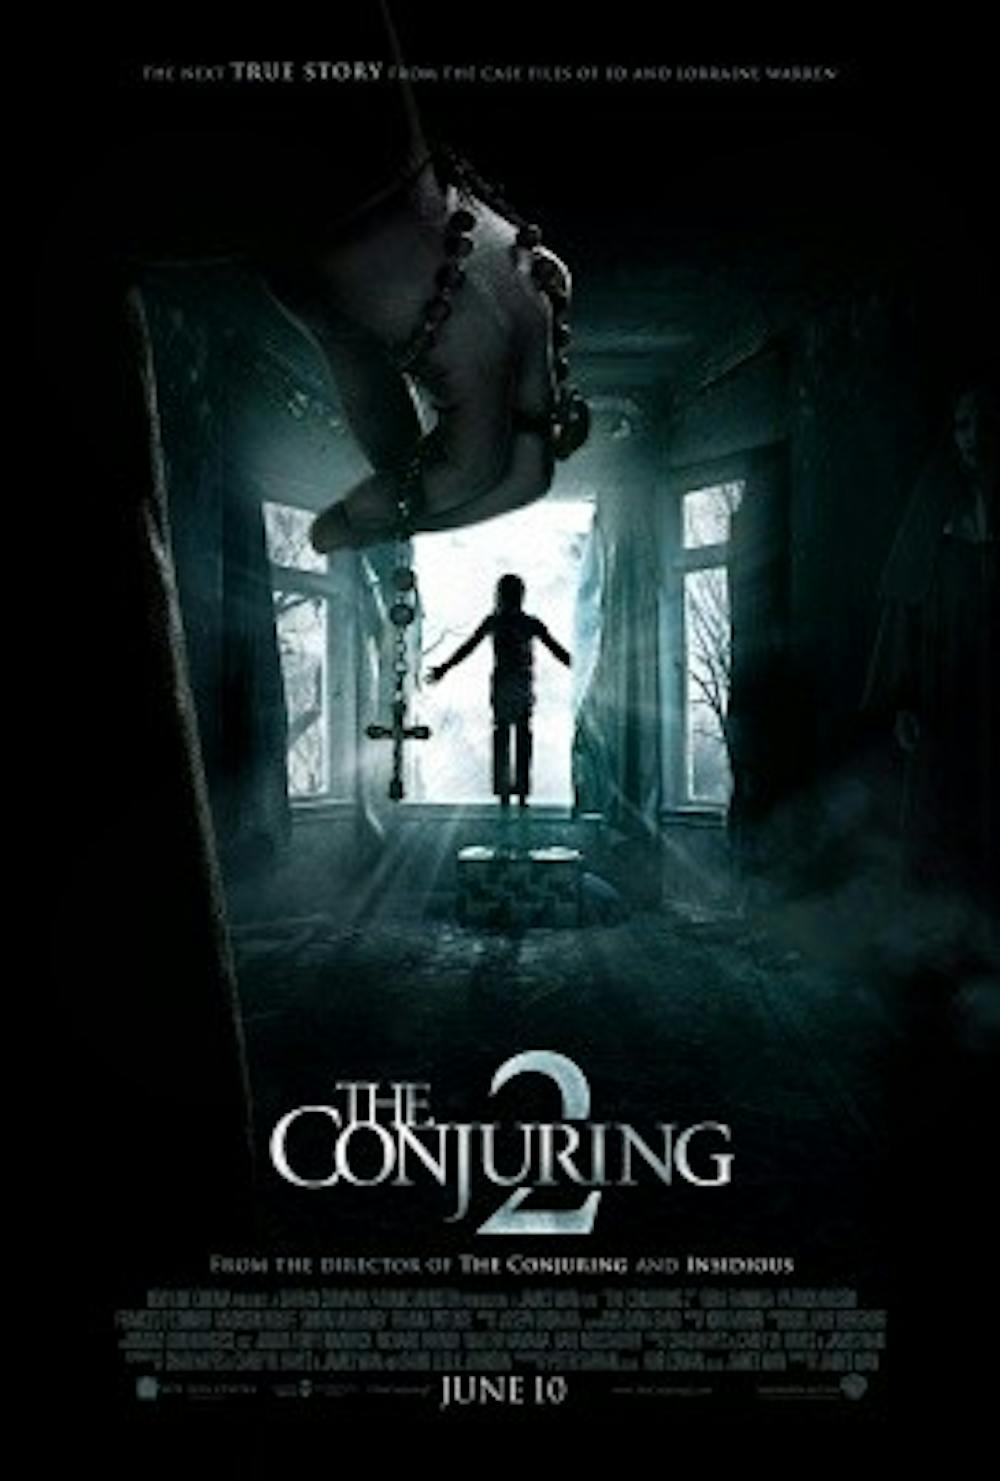 <p>"The Conjuring 2" may not be the most original of horror films, but it does provide a satisfying sequel to the original "The Conjuring" film.</p>